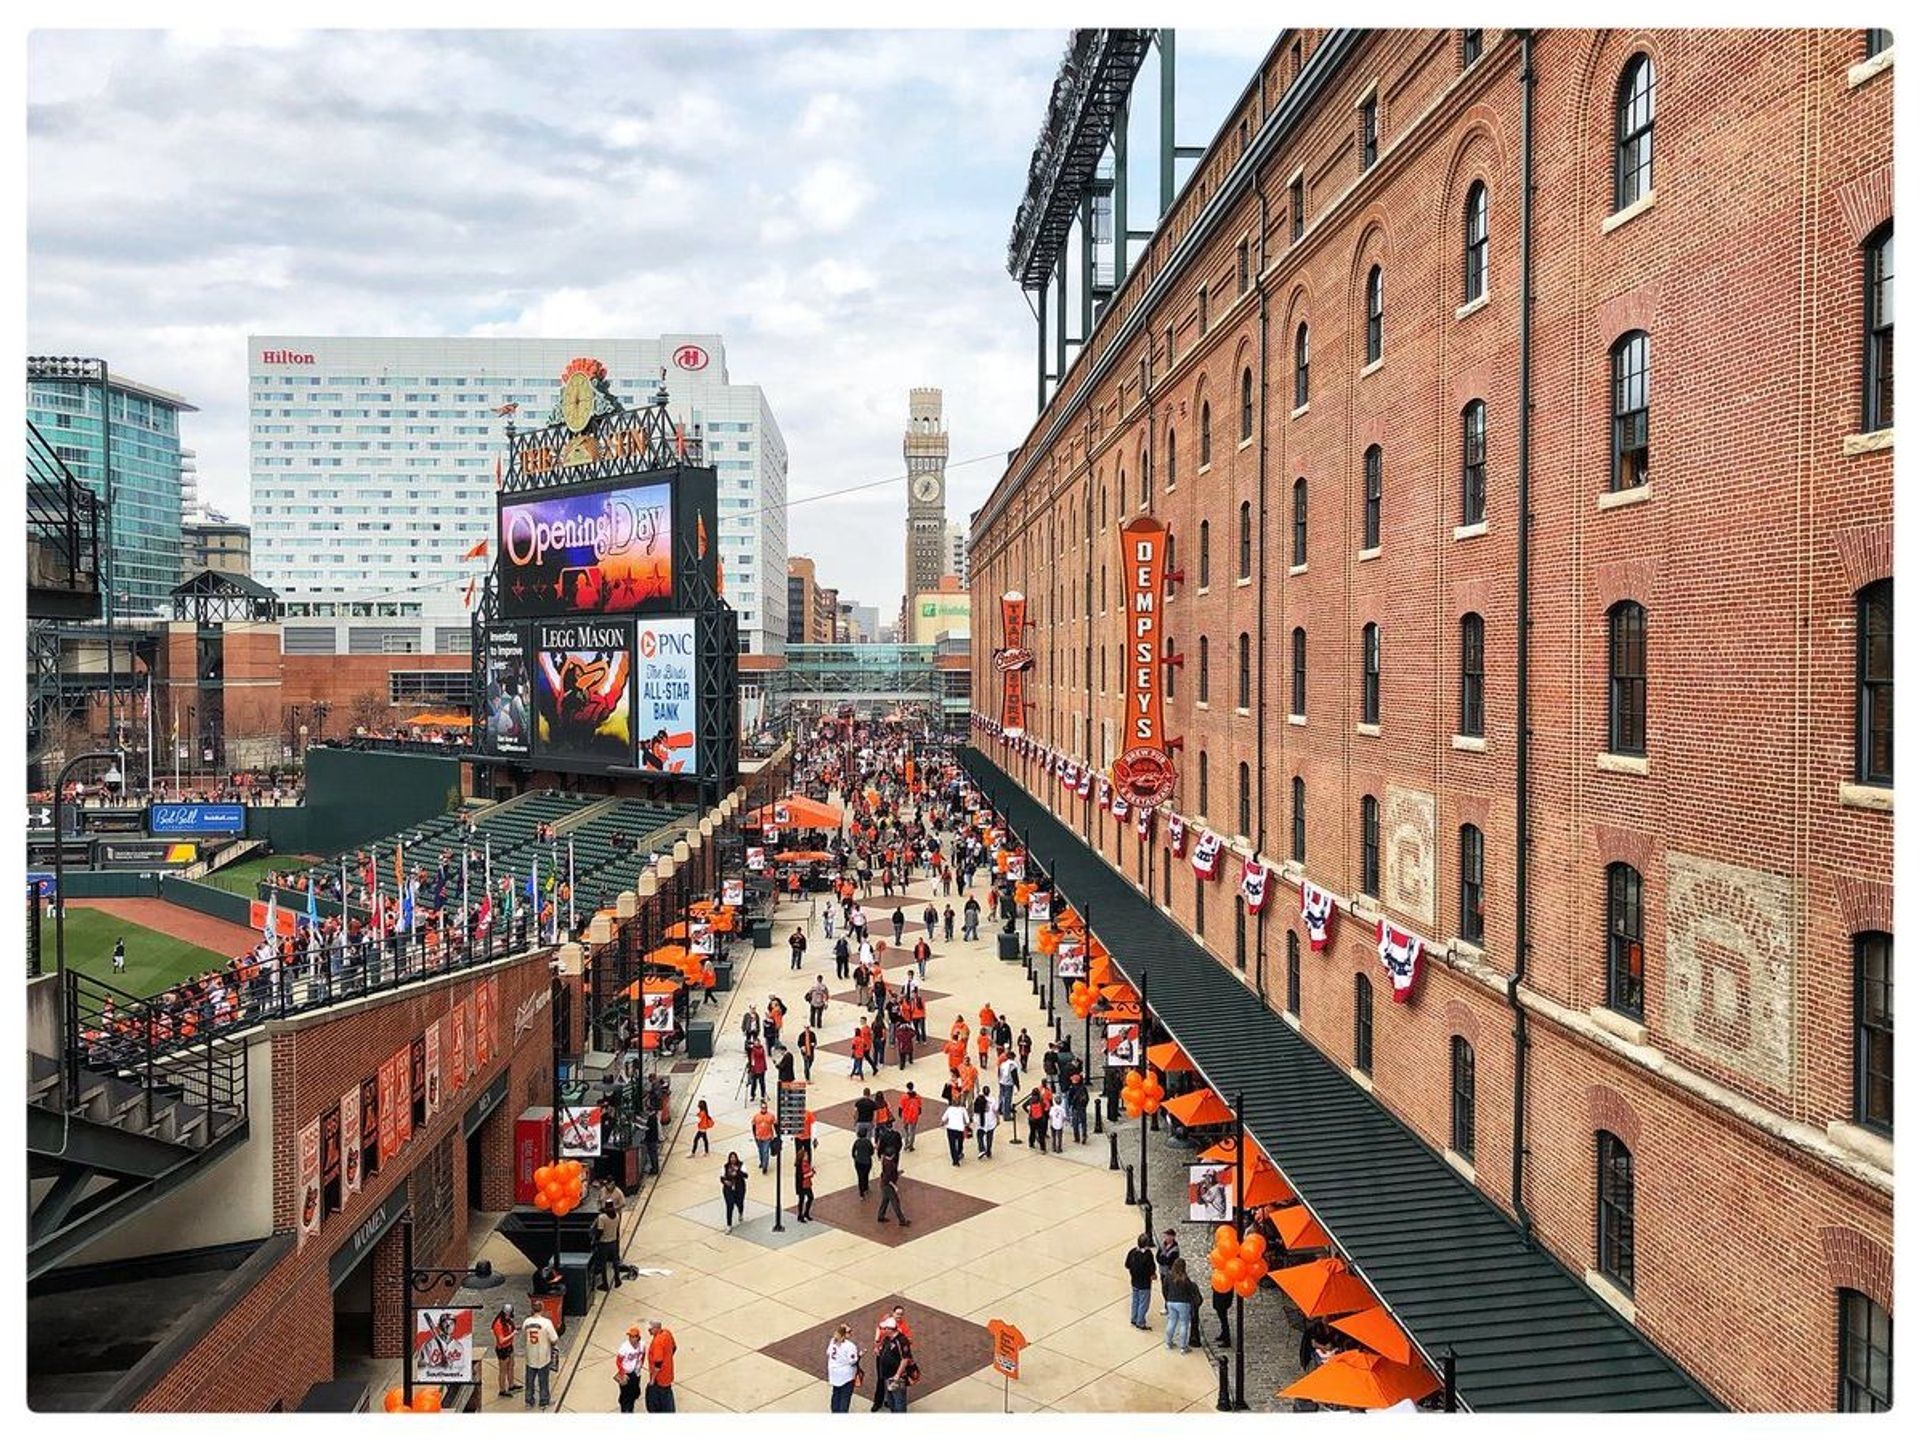 1920x1440 Fans file into Oriole Park at Camden Yards hours before